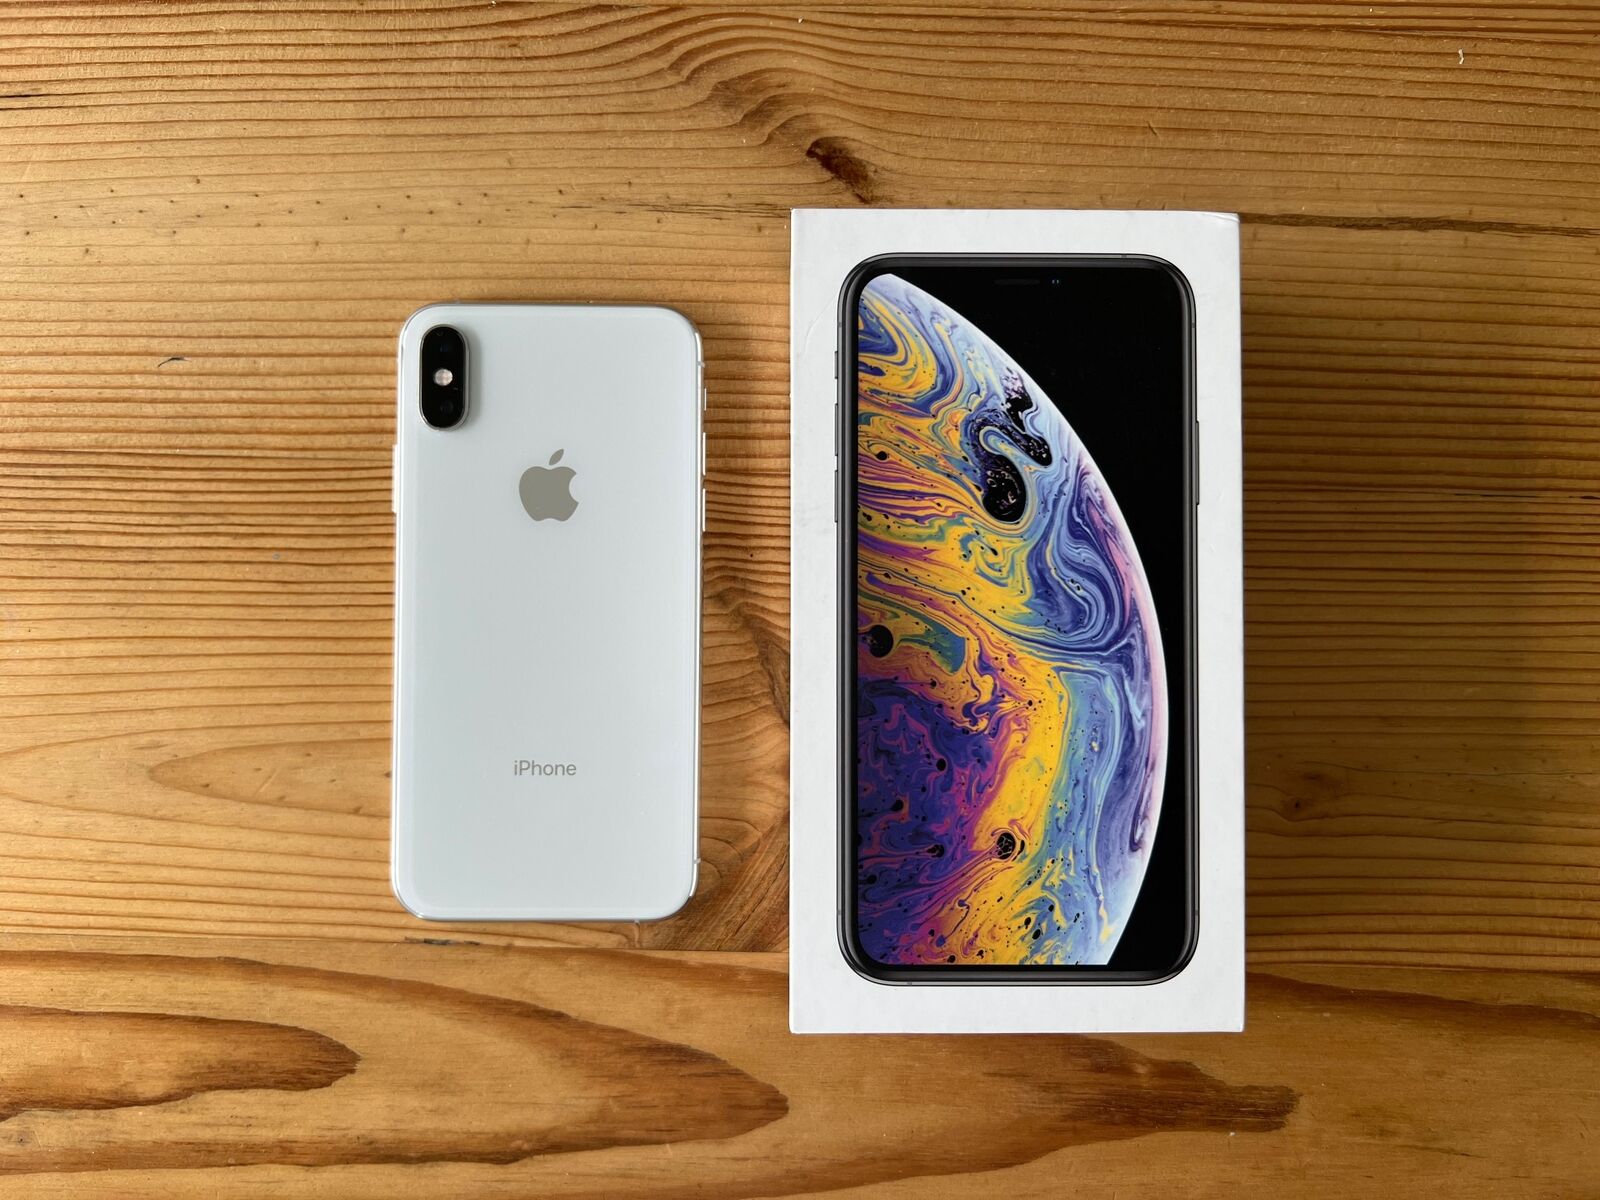 Apple iPhone XS - 256GB - Silver (Unlocked) A1920 (CDMA + GSM) for 